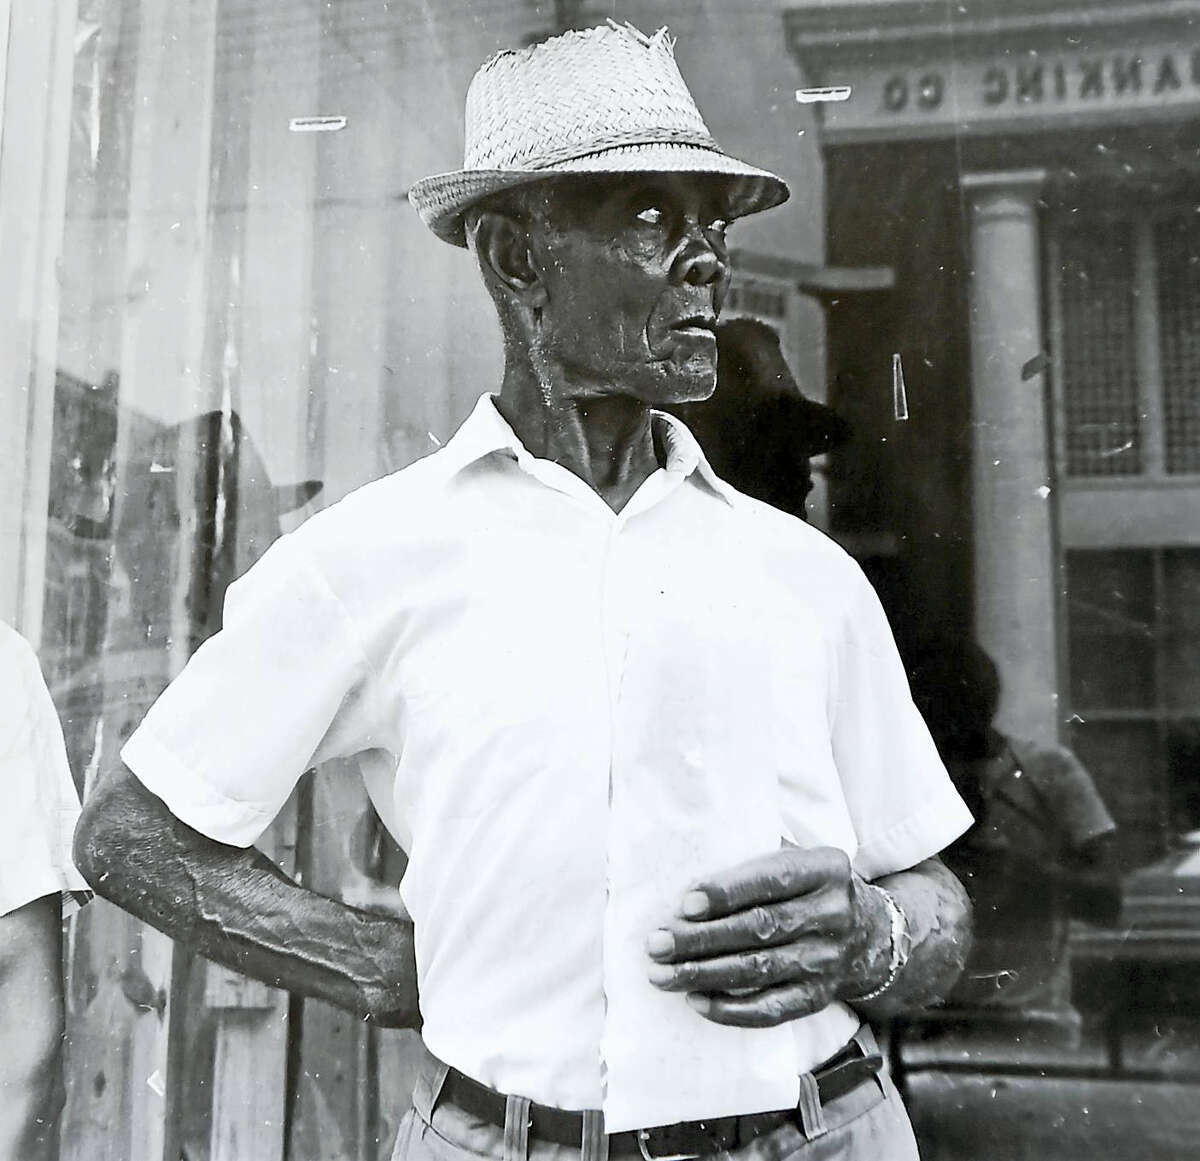 A silver gelatin print from Raymond Smith, entitled “Demopolis, Ala.” and dedicated to Walker Evans.